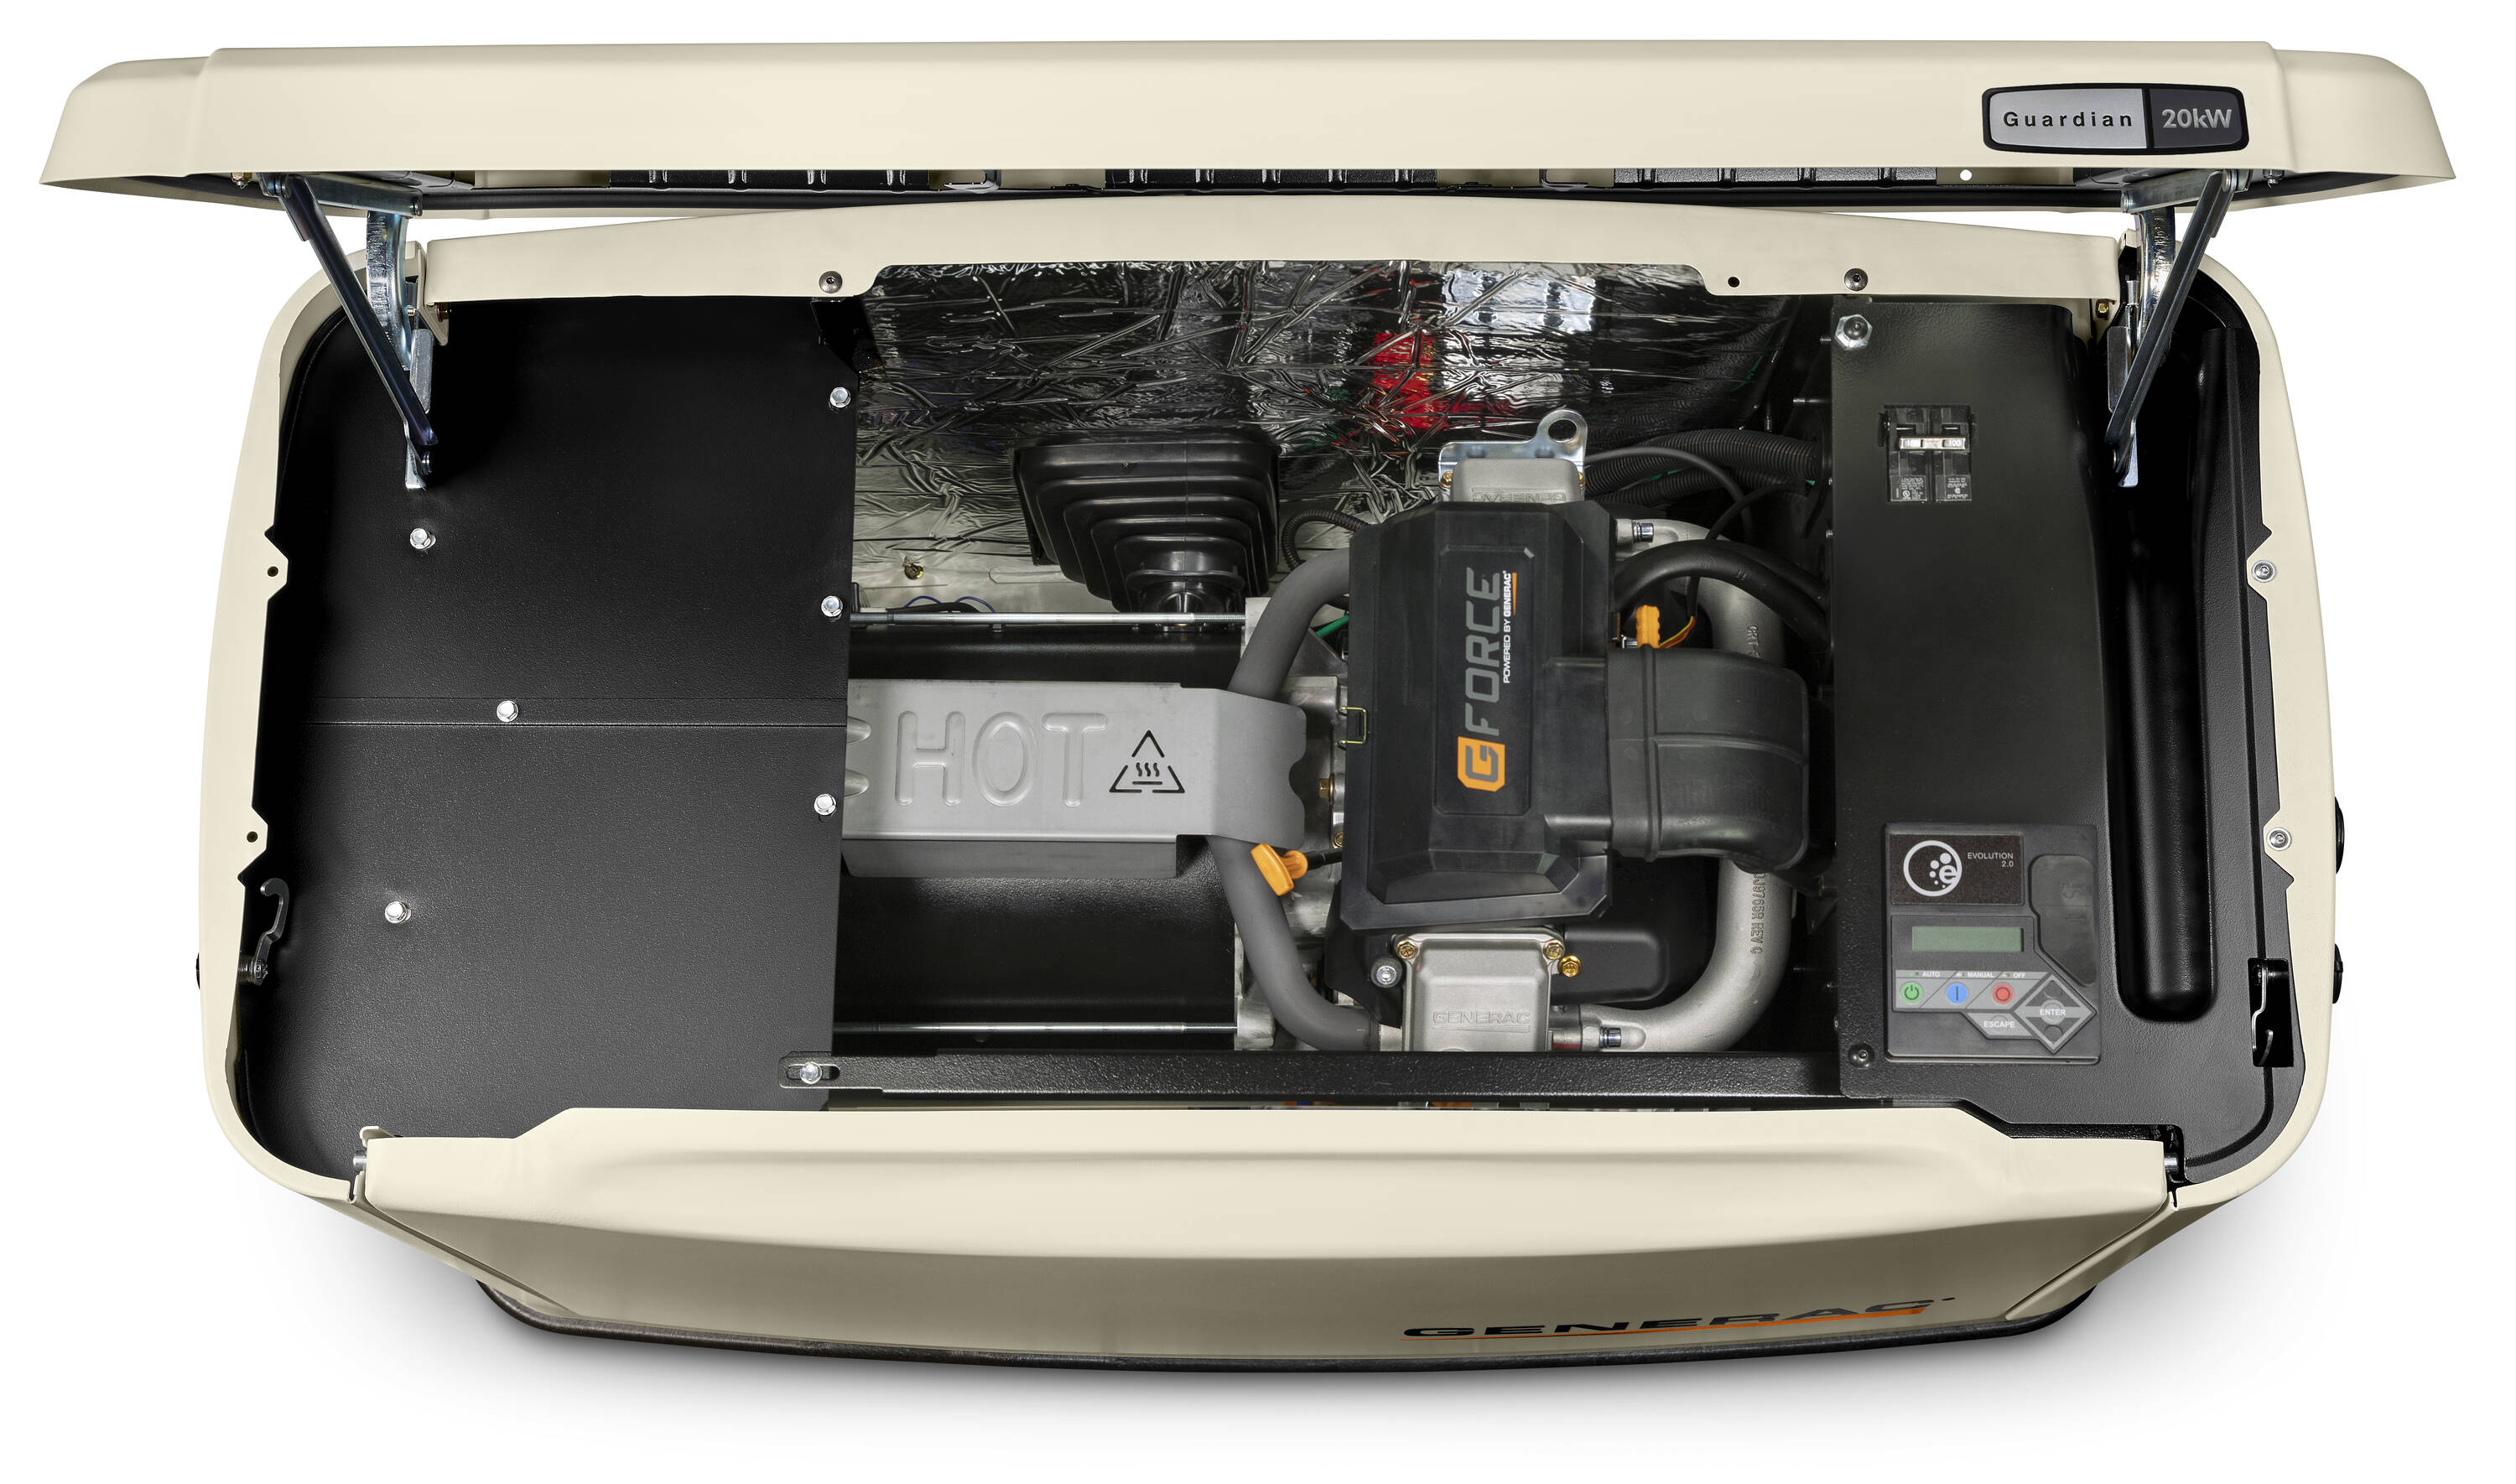 Dual Fuel (Liquid Propane/Natural Gas) Home Standby Generator in Off-White | - Generac 7077